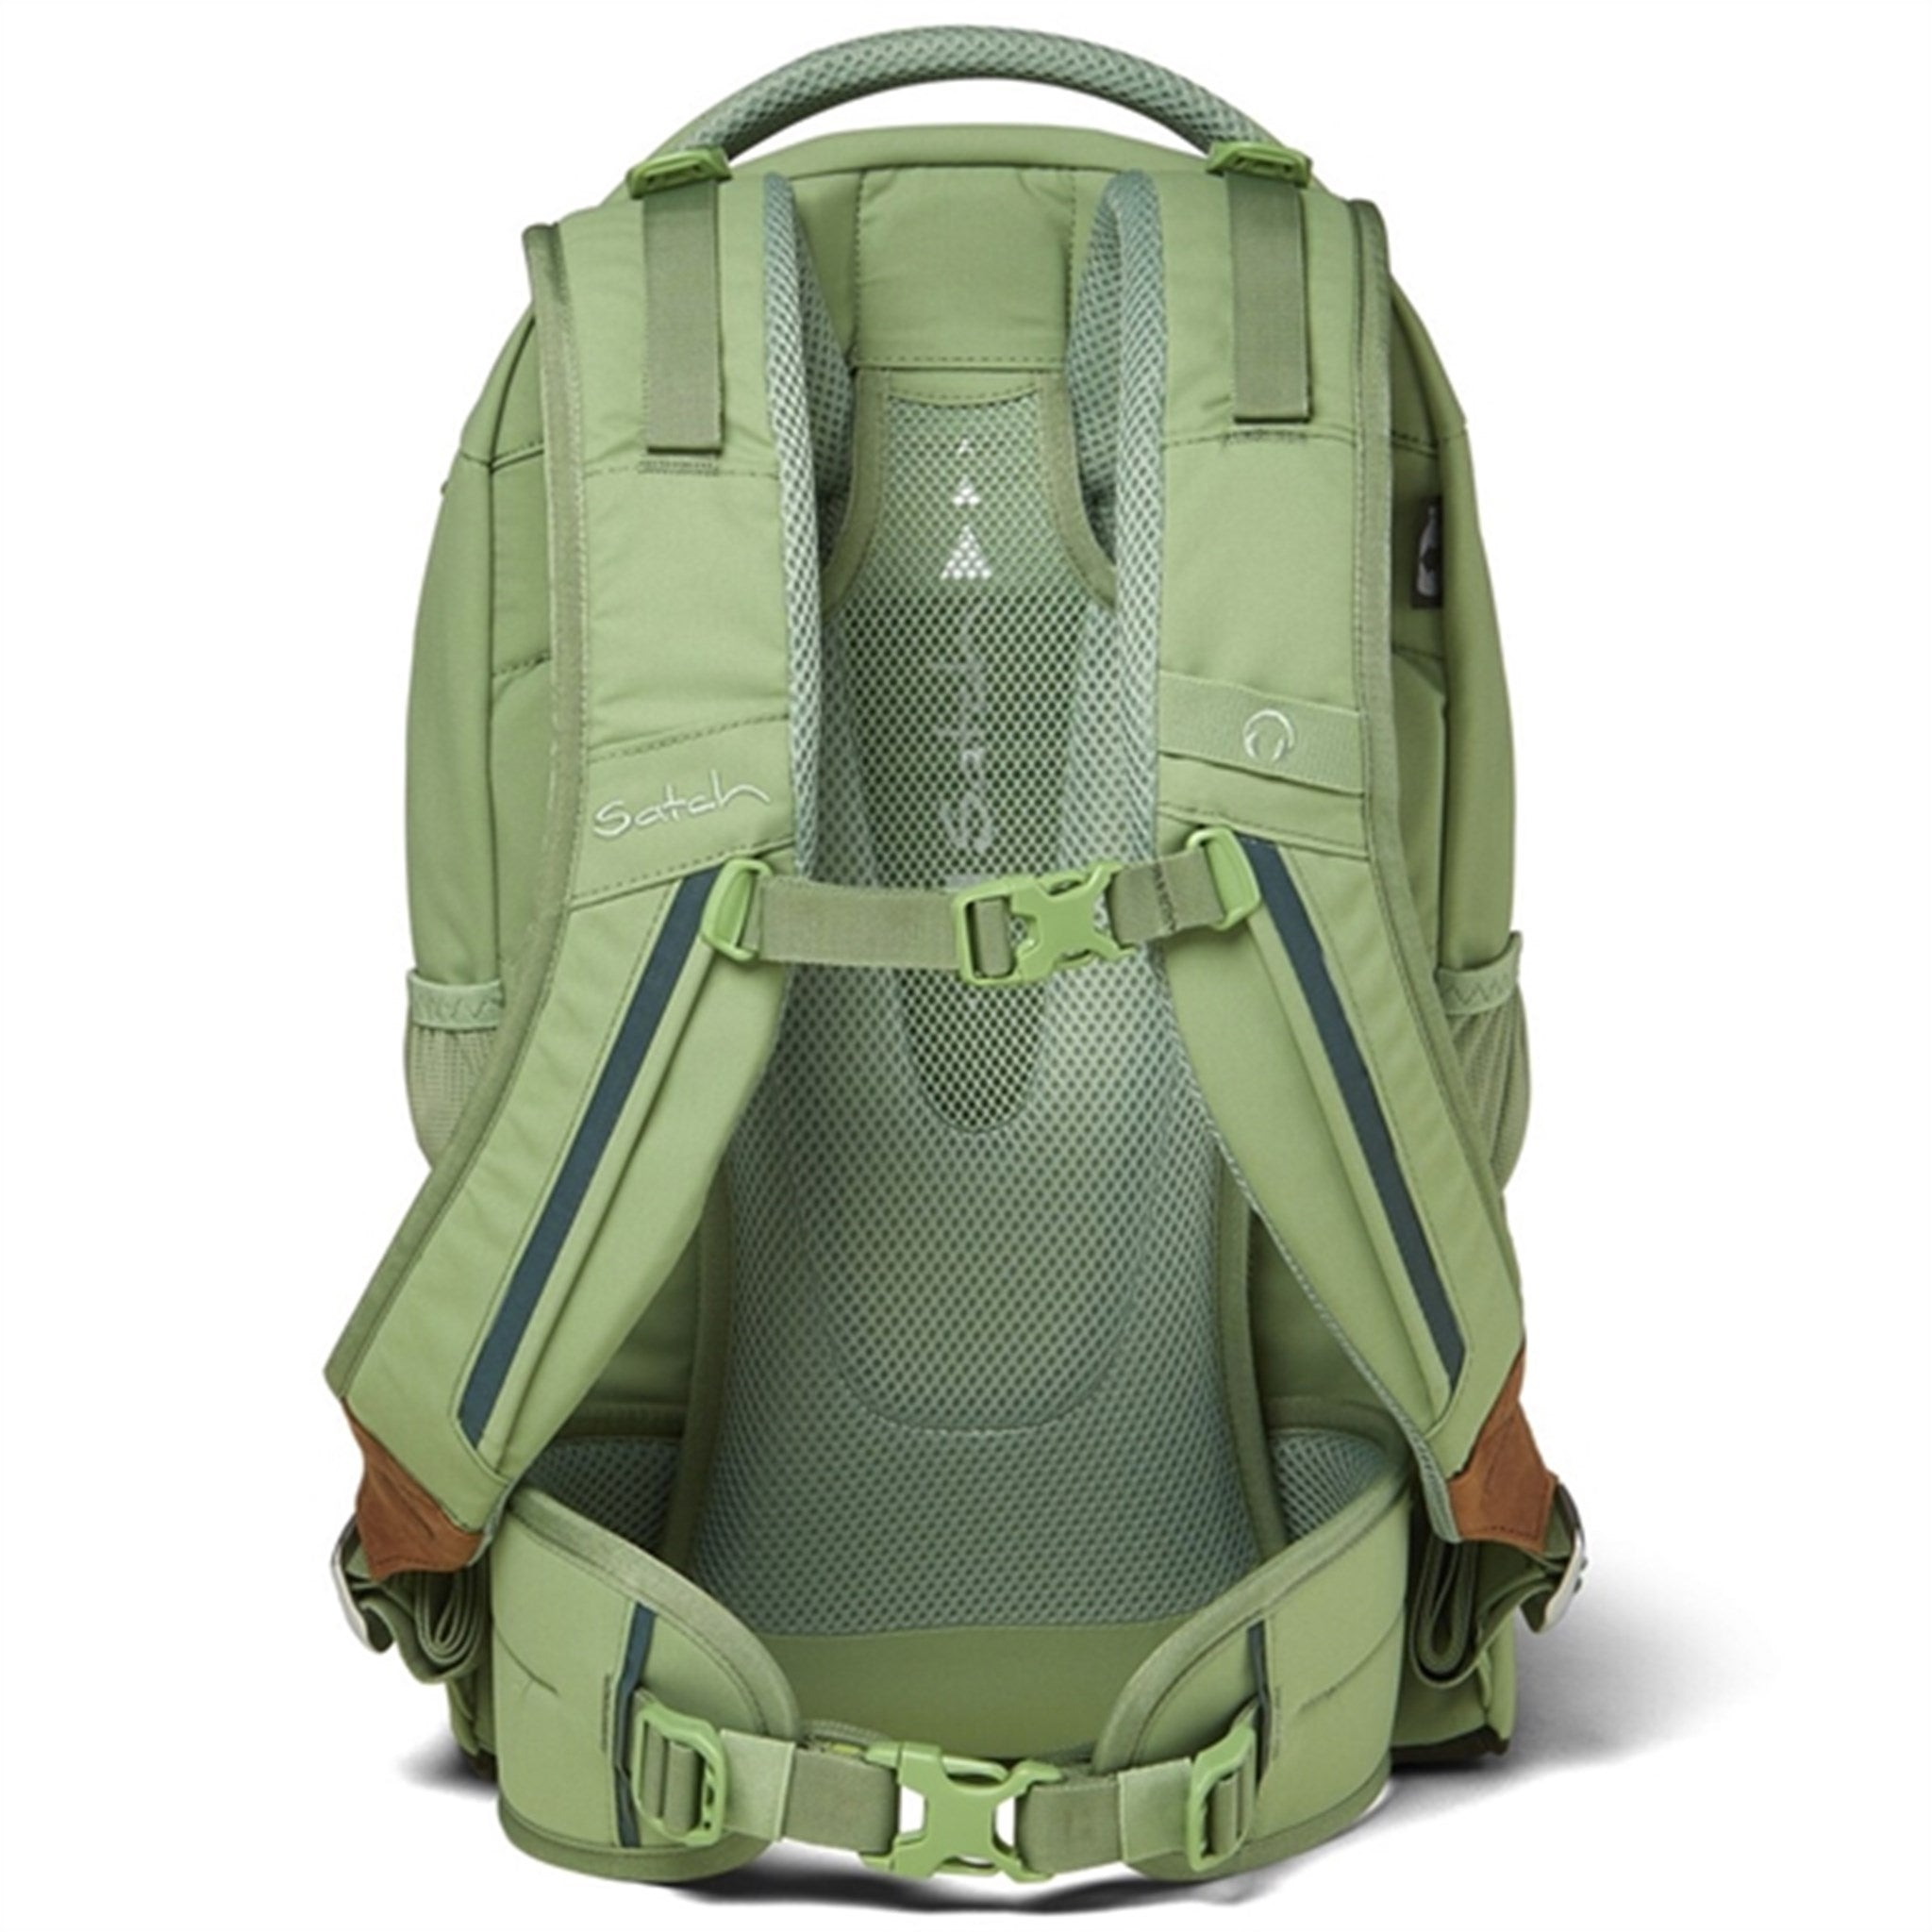 Satch Pack School Bag Special Edition Nordic Jade Green 3